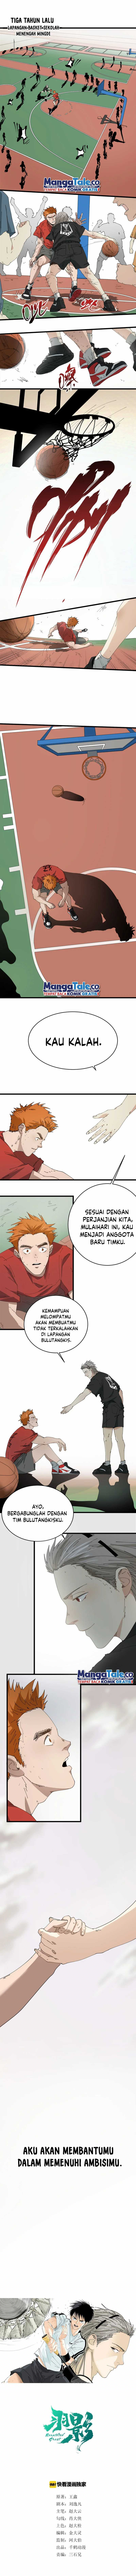 Badminton Ghost Chapter 06